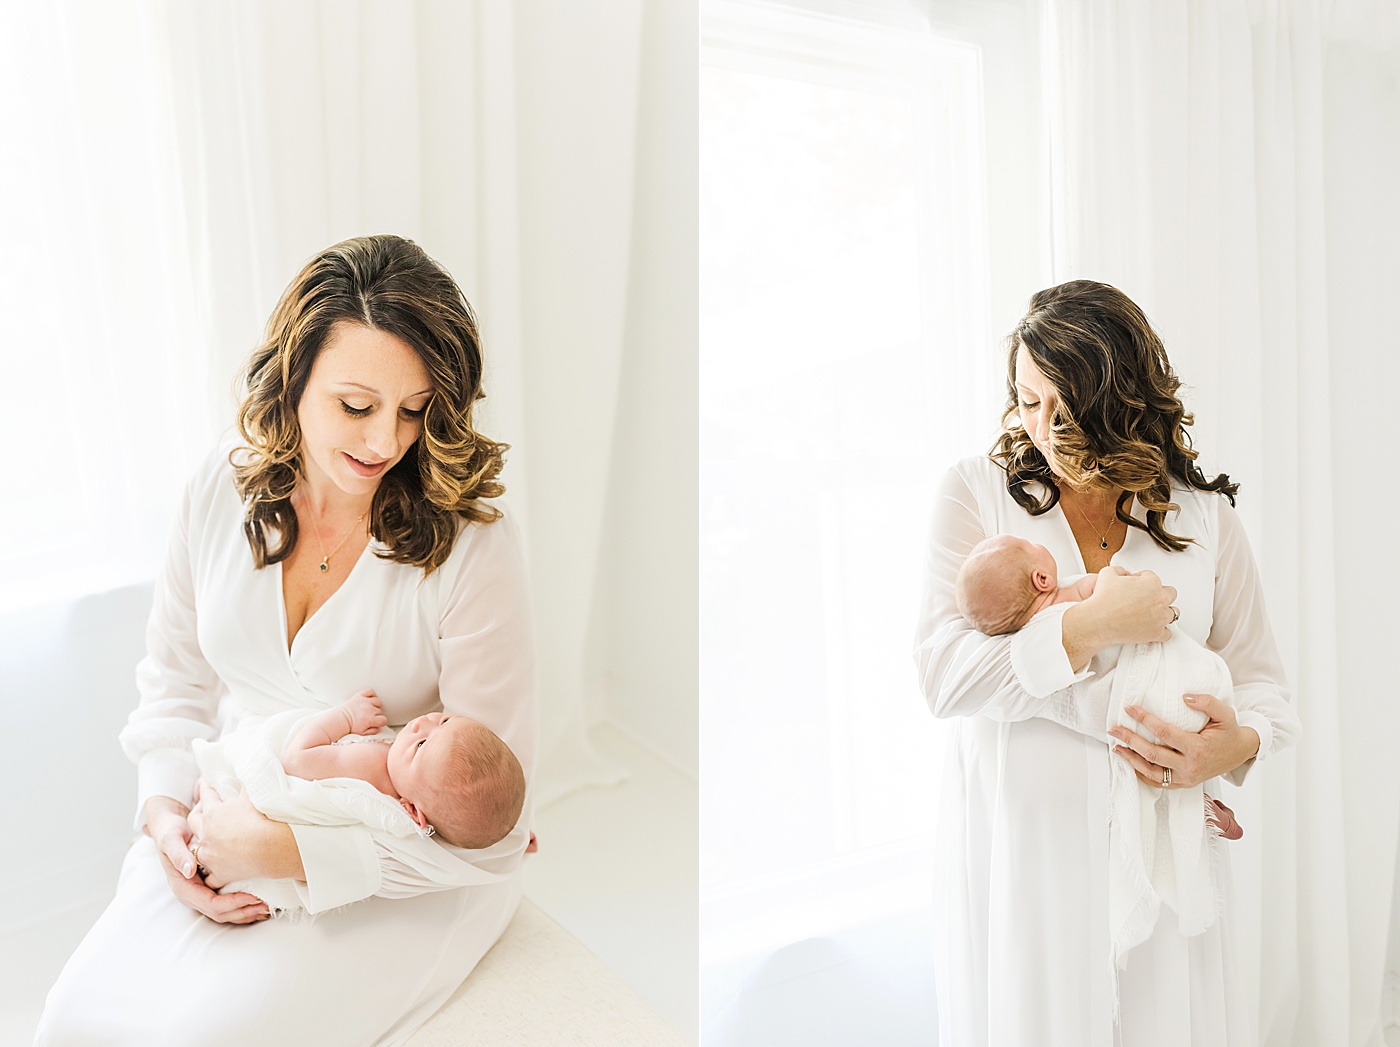 Portrait of mom in long while dress holding her new baby boy | Anna Wisjo Photography - Baby Photographer Charlotte